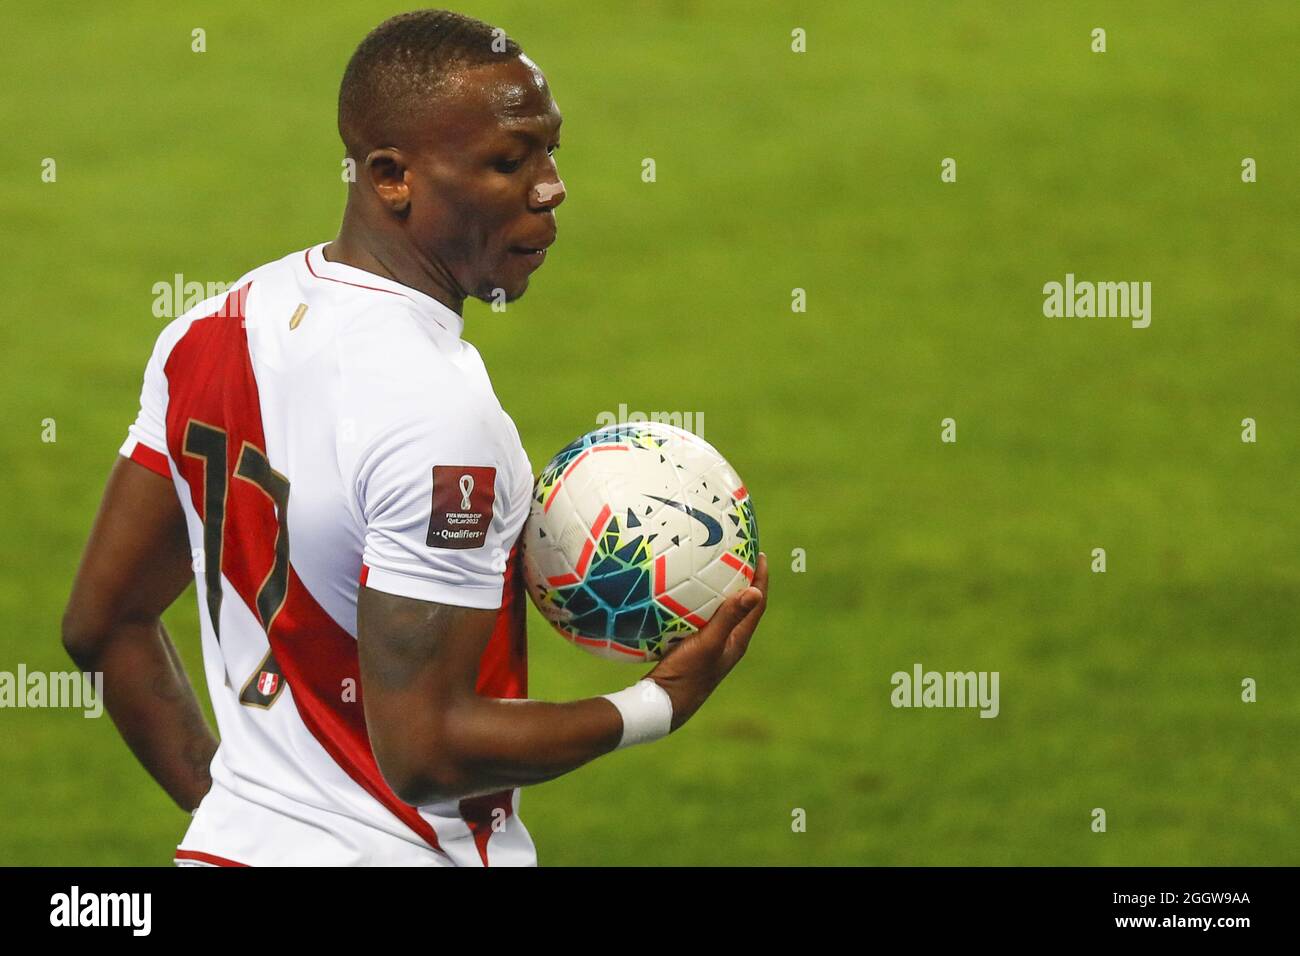 Lima, Peru. 02nd Sep, 2021. Luis Advíncula during the 2022 Football World Cup Qualifier between Peru adn Uruguay at the Estádio Nacional del Peru in Lima, Peru. The game ended 1-1 with Tapia scoring for the hosts in the 24th minute and de Arrascaeta equalizing for Uruguay in the 29th. Credit: SPP Sport Press Photo. /Alamy Live News Stock Photo